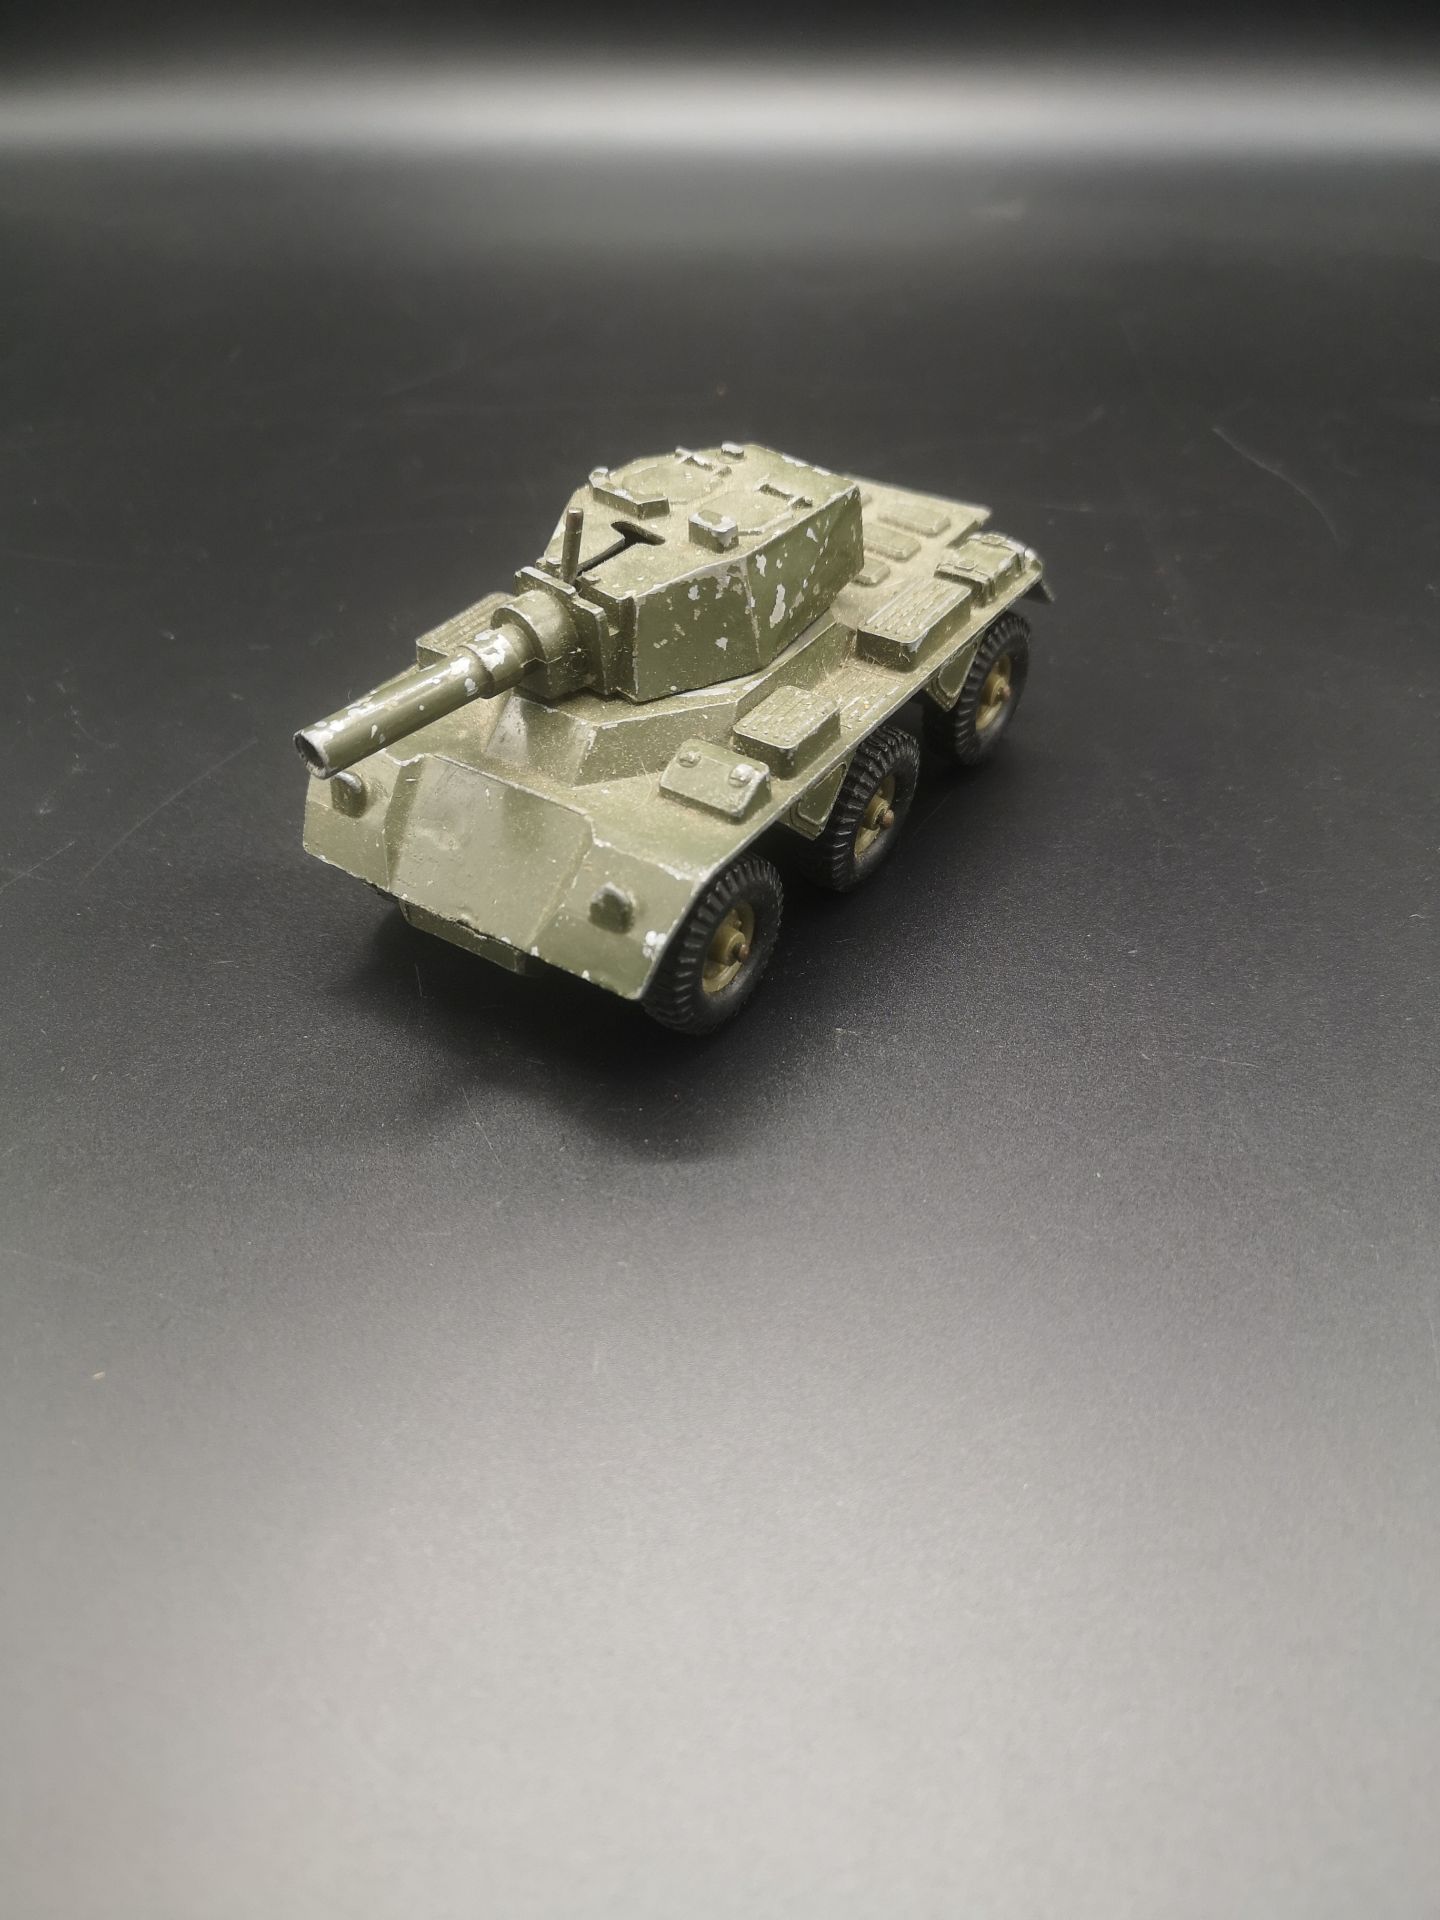 A Crescent diecast model tank together with a Dinky die-cast model missile launcher - Image 2 of 8